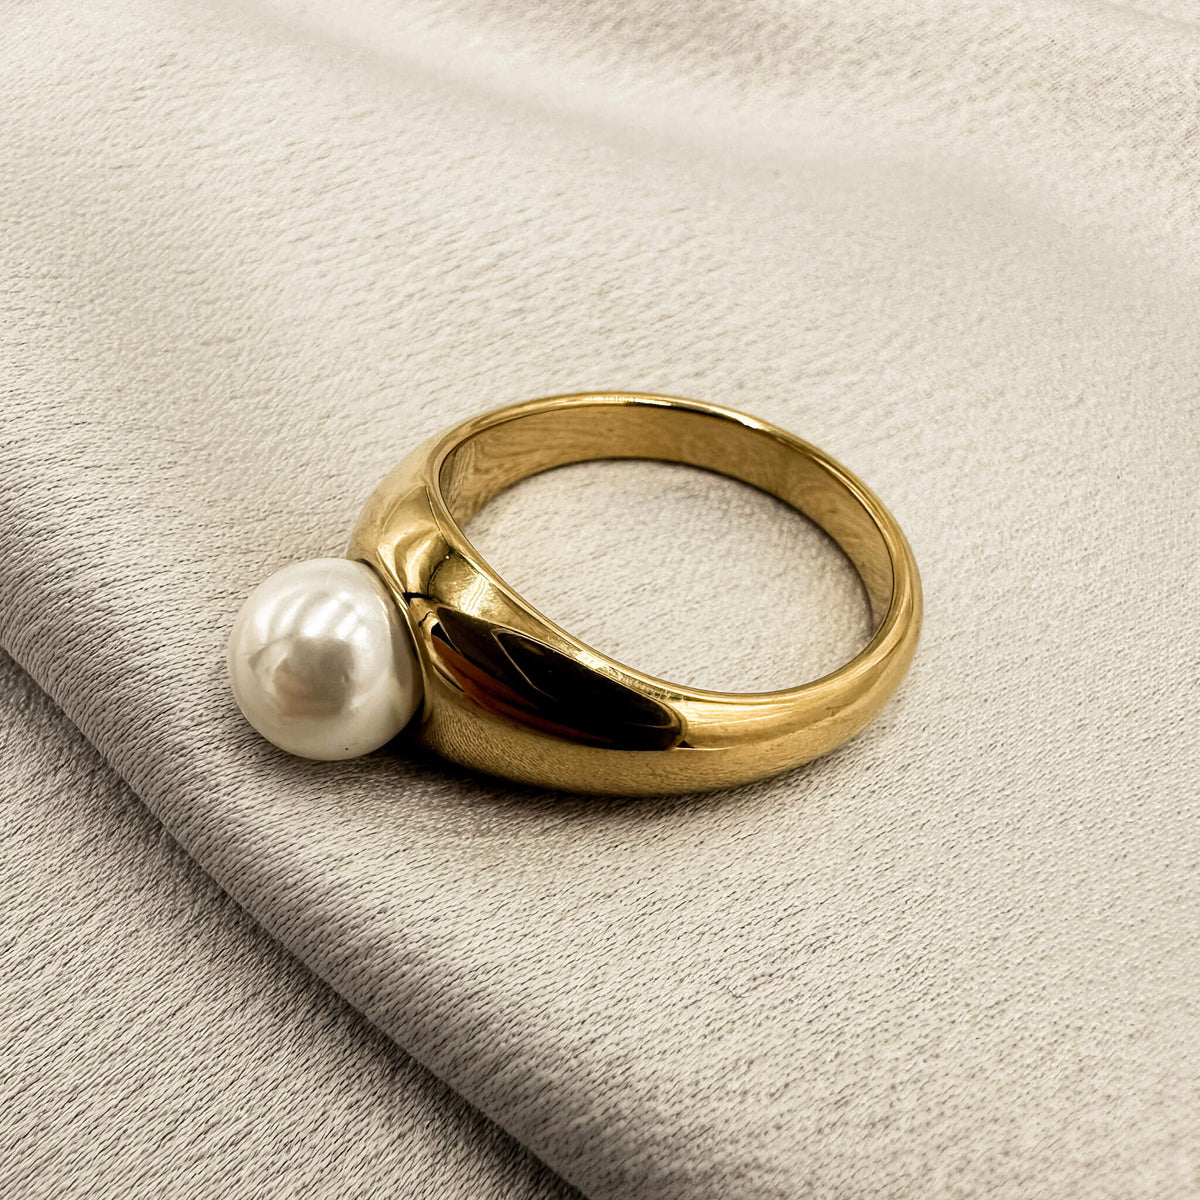 the amara ring is laid flat on a silk surface. the ring has a gold band that is chunky and holds a pearl. 